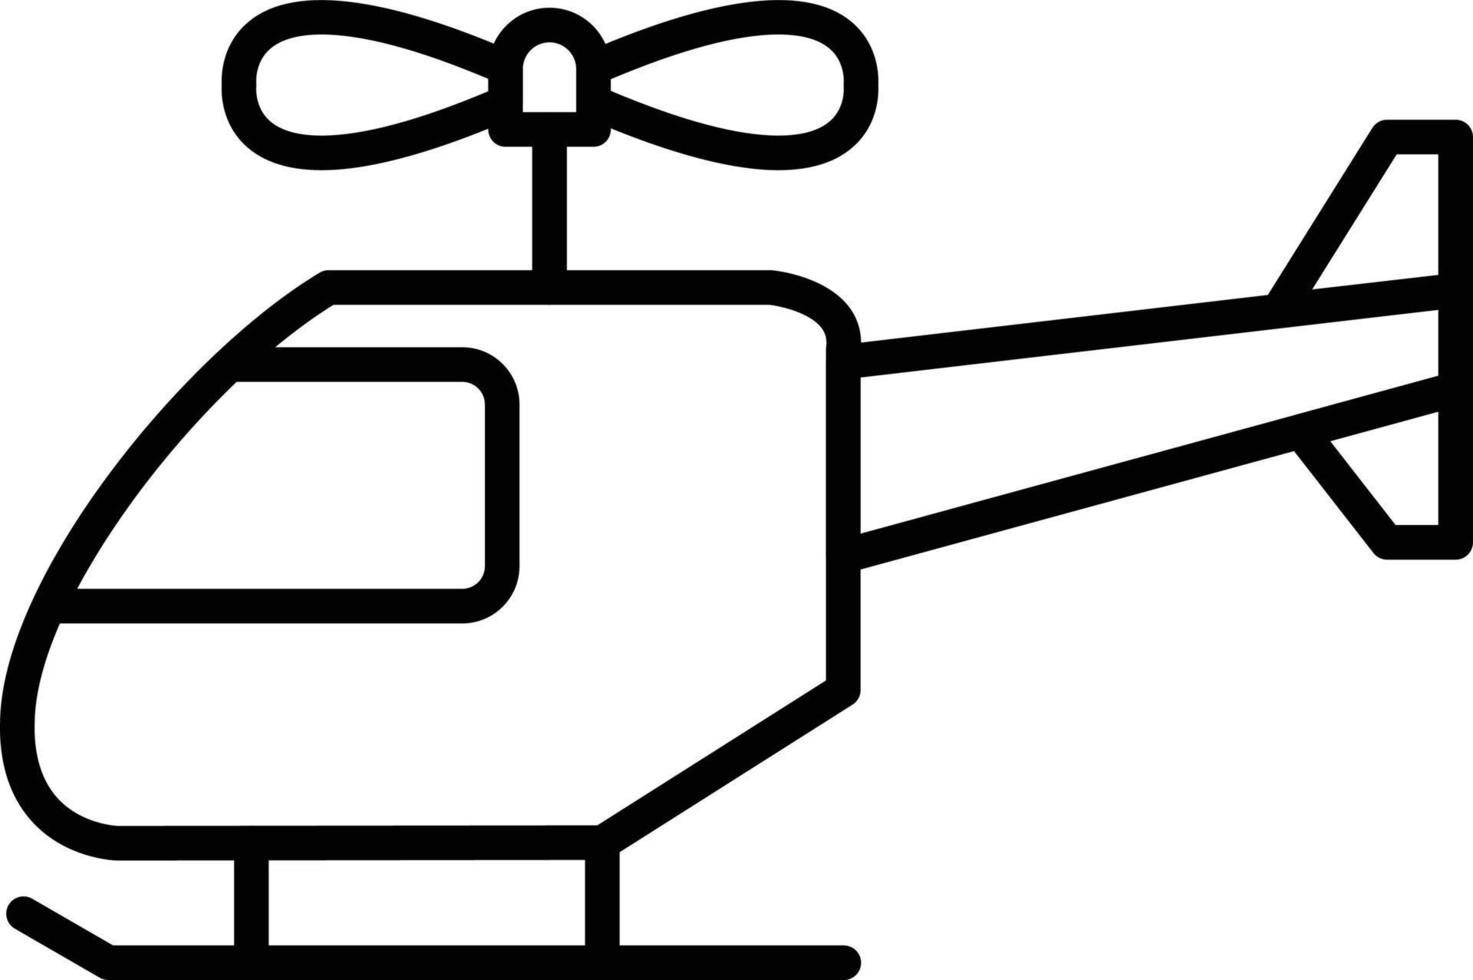 Helicopter Outline Icon vector